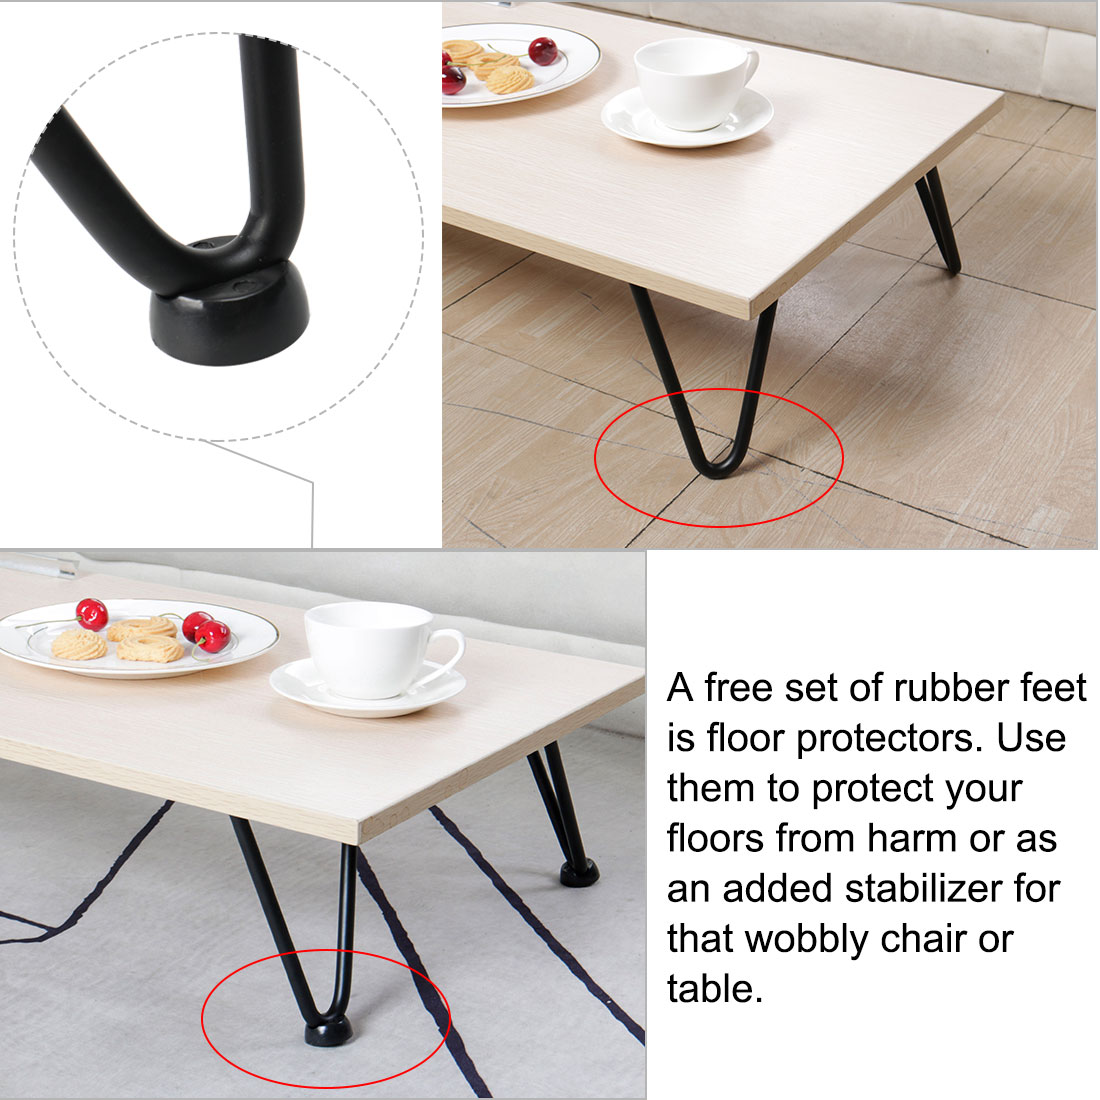 10" Hairpin Table Legs Coffee Legs DIY Iron Furniture Legs Room Furniture Accessories, 4pcs - image 3 of 7